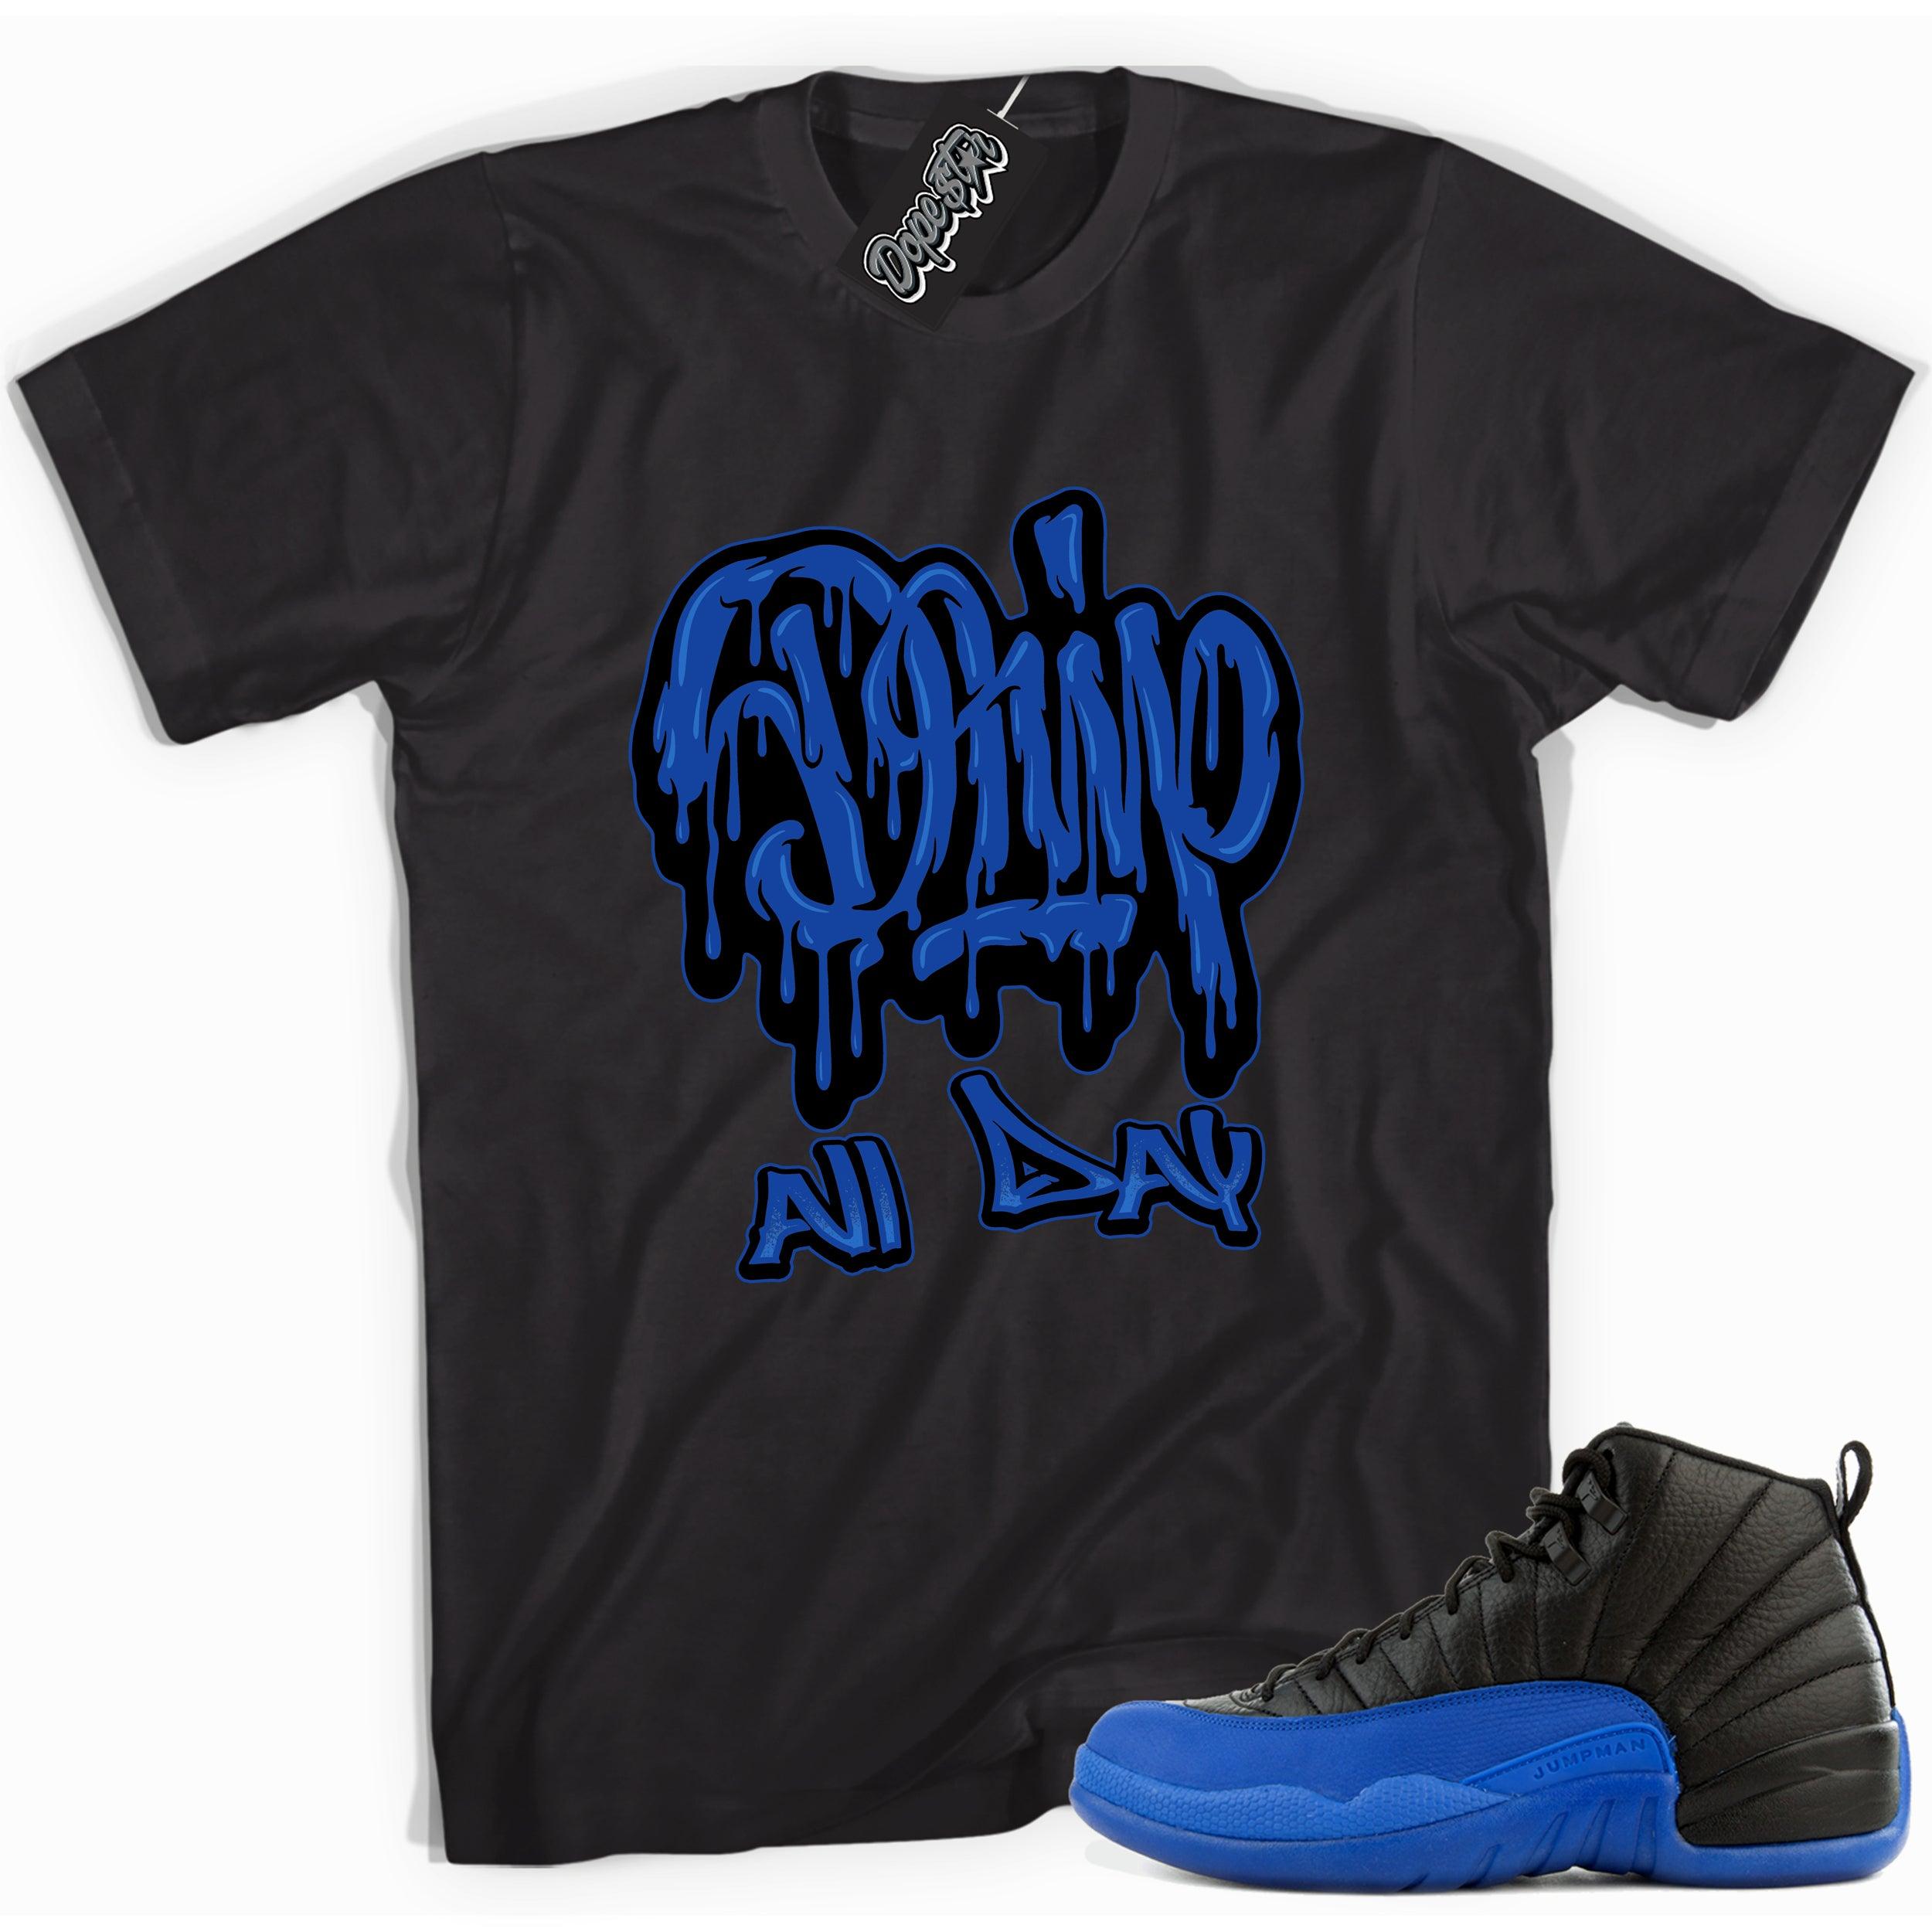 Cool black graphic tee with 'drip all day' print, that perfectly matches Air Jordan 12 Retro Black Game Royal sneakers.